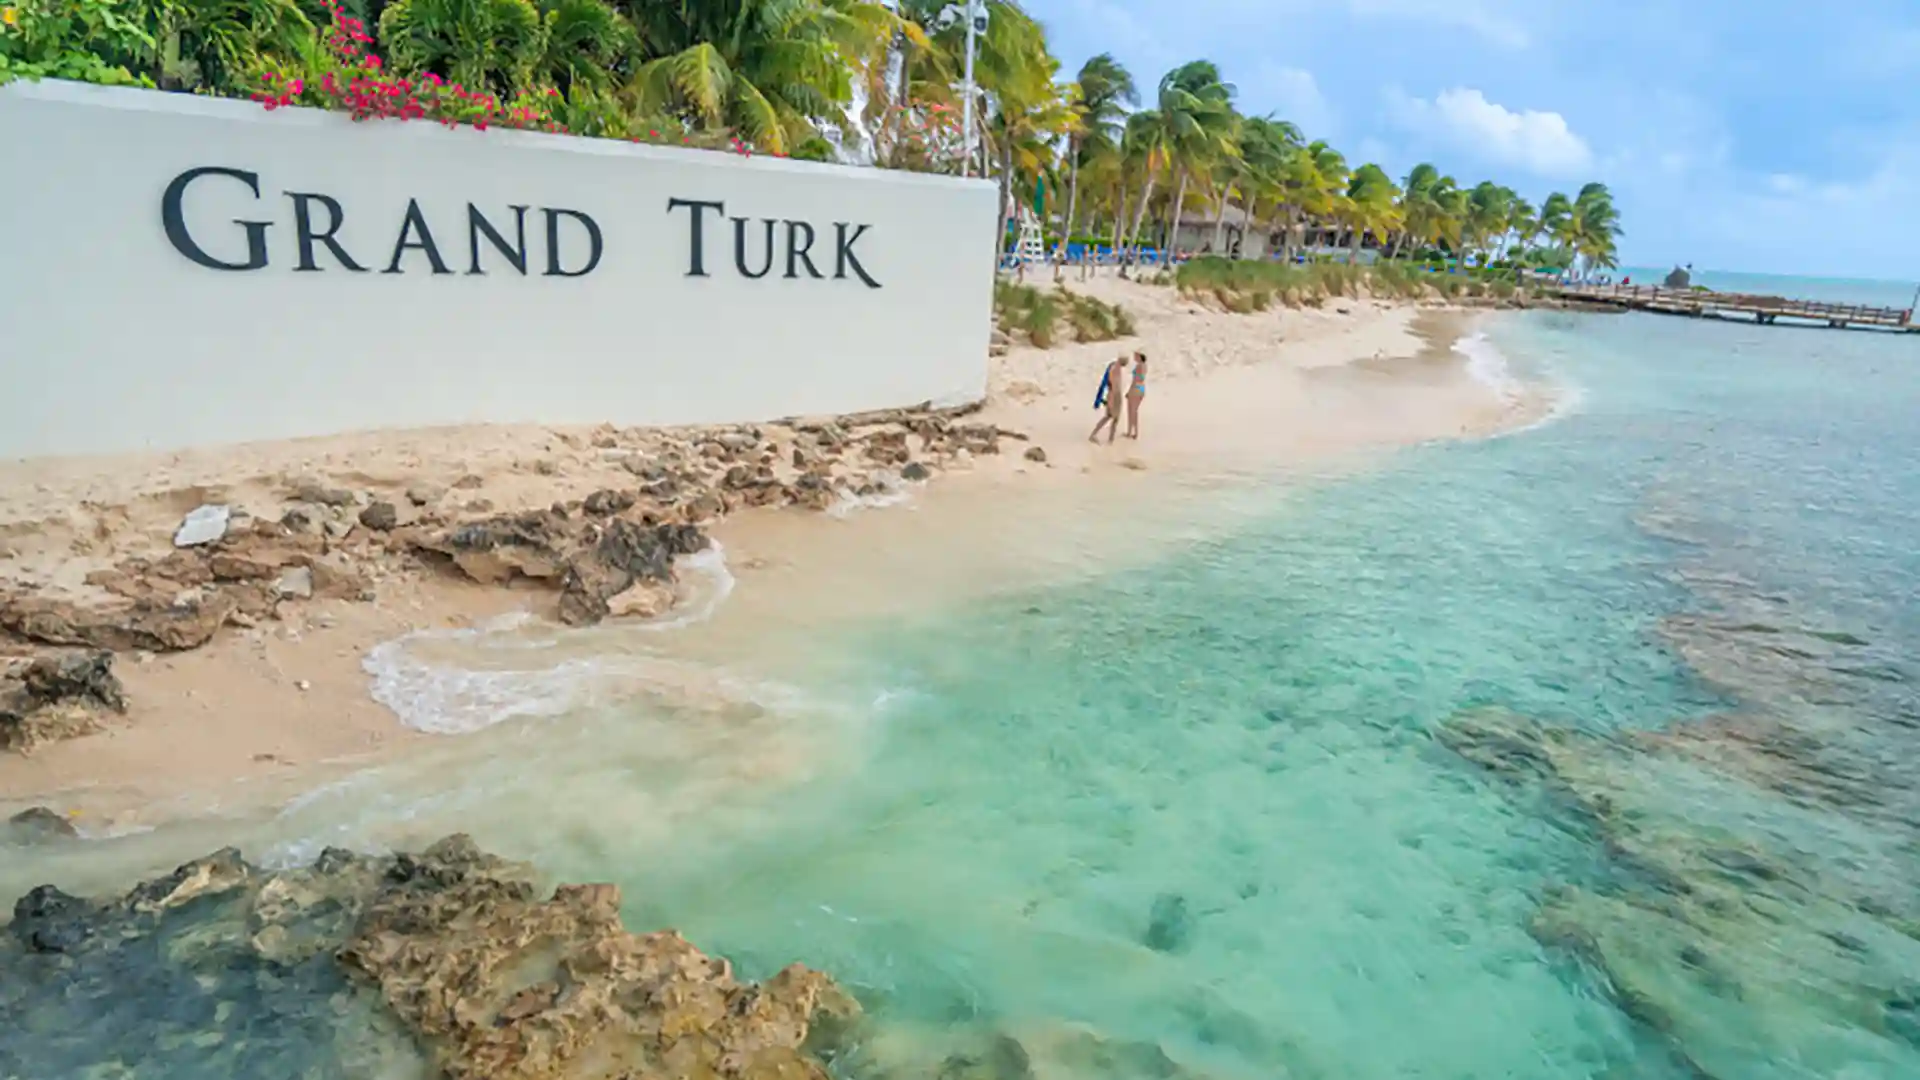 View of Grand Turk sign near beach with palm trees in background.